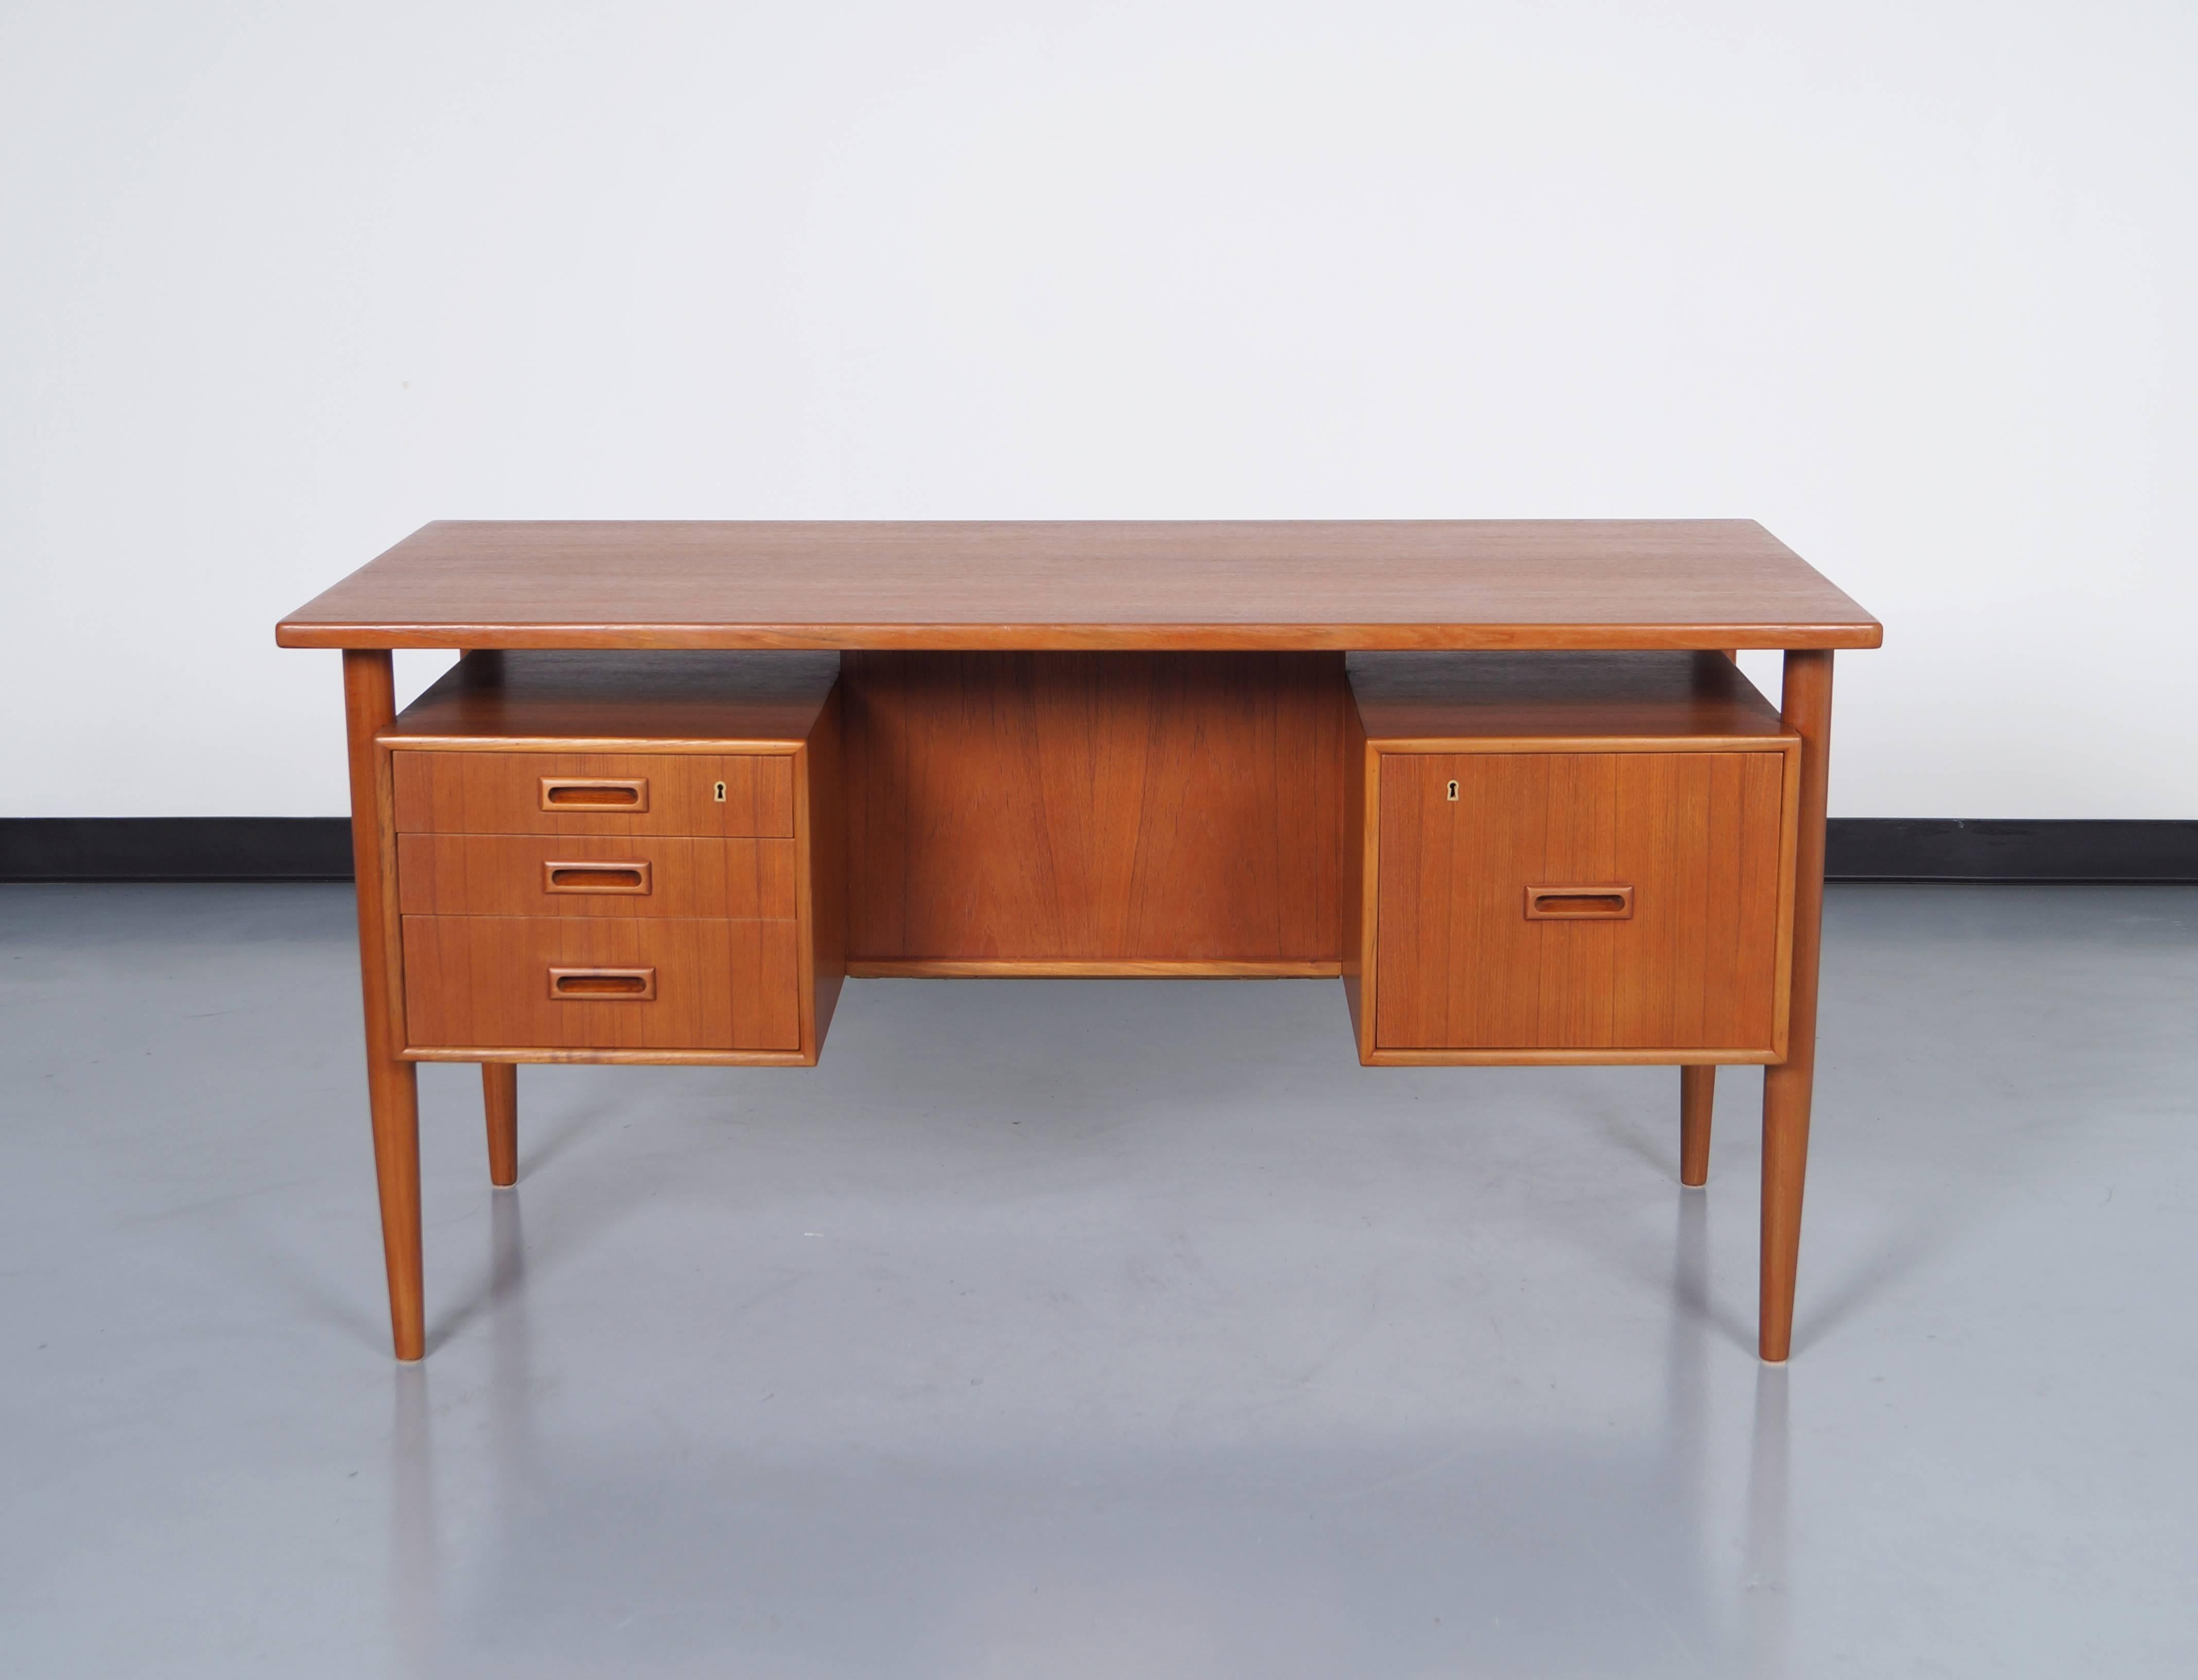 Danish modern floating top desk features three drawers on the left side and one file cabinet to the right. A rear storage space for display.